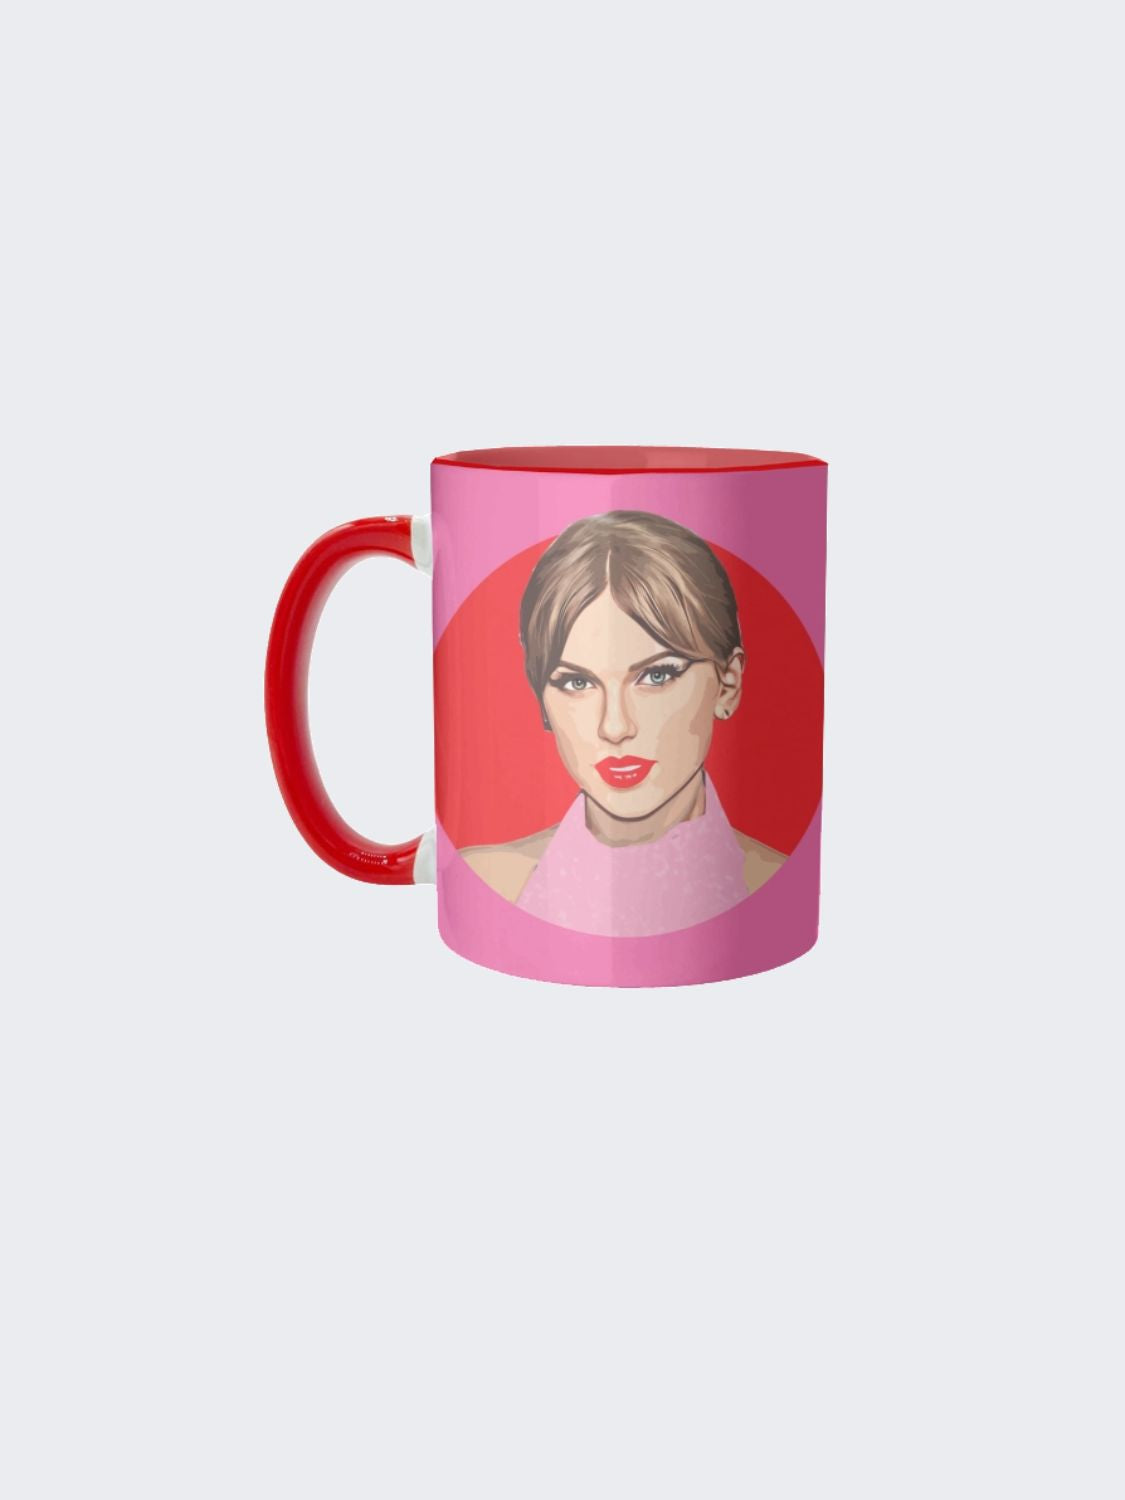 taylor swift red lips coffee mug with red interior and handle